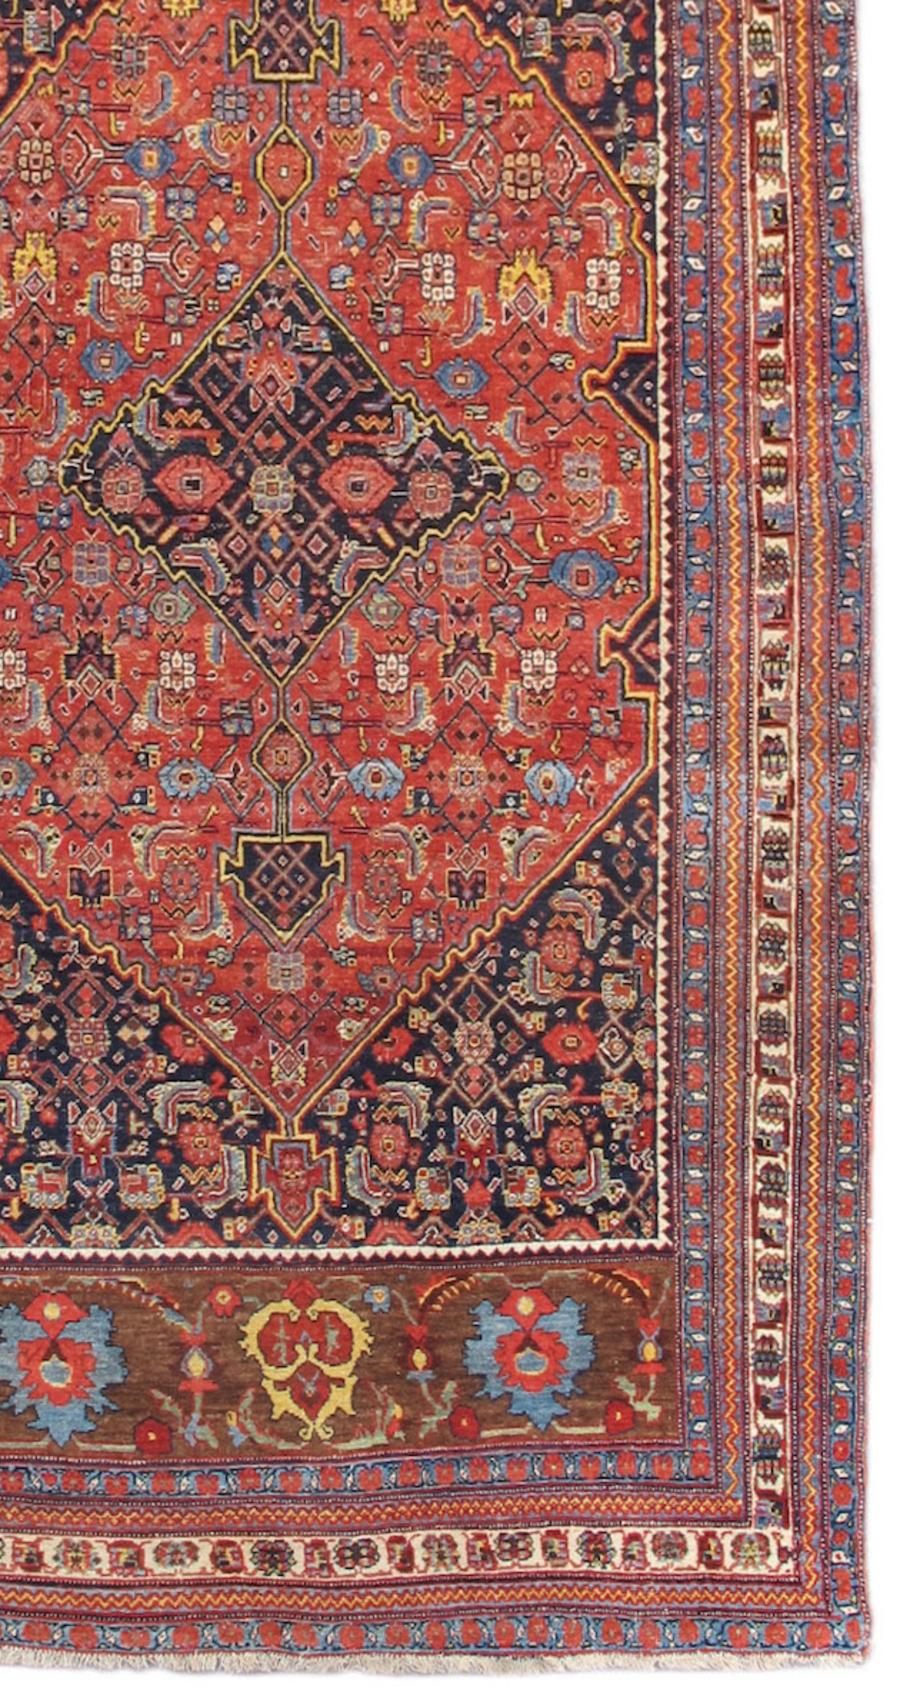 This exceedingly pleasing Bidjar runner approaches the long and narrow format in a playful and novel manner. During the late 19th century the Kurdish town of Bijar and its surrounding area became a major Persian carpet producing center, weaving a